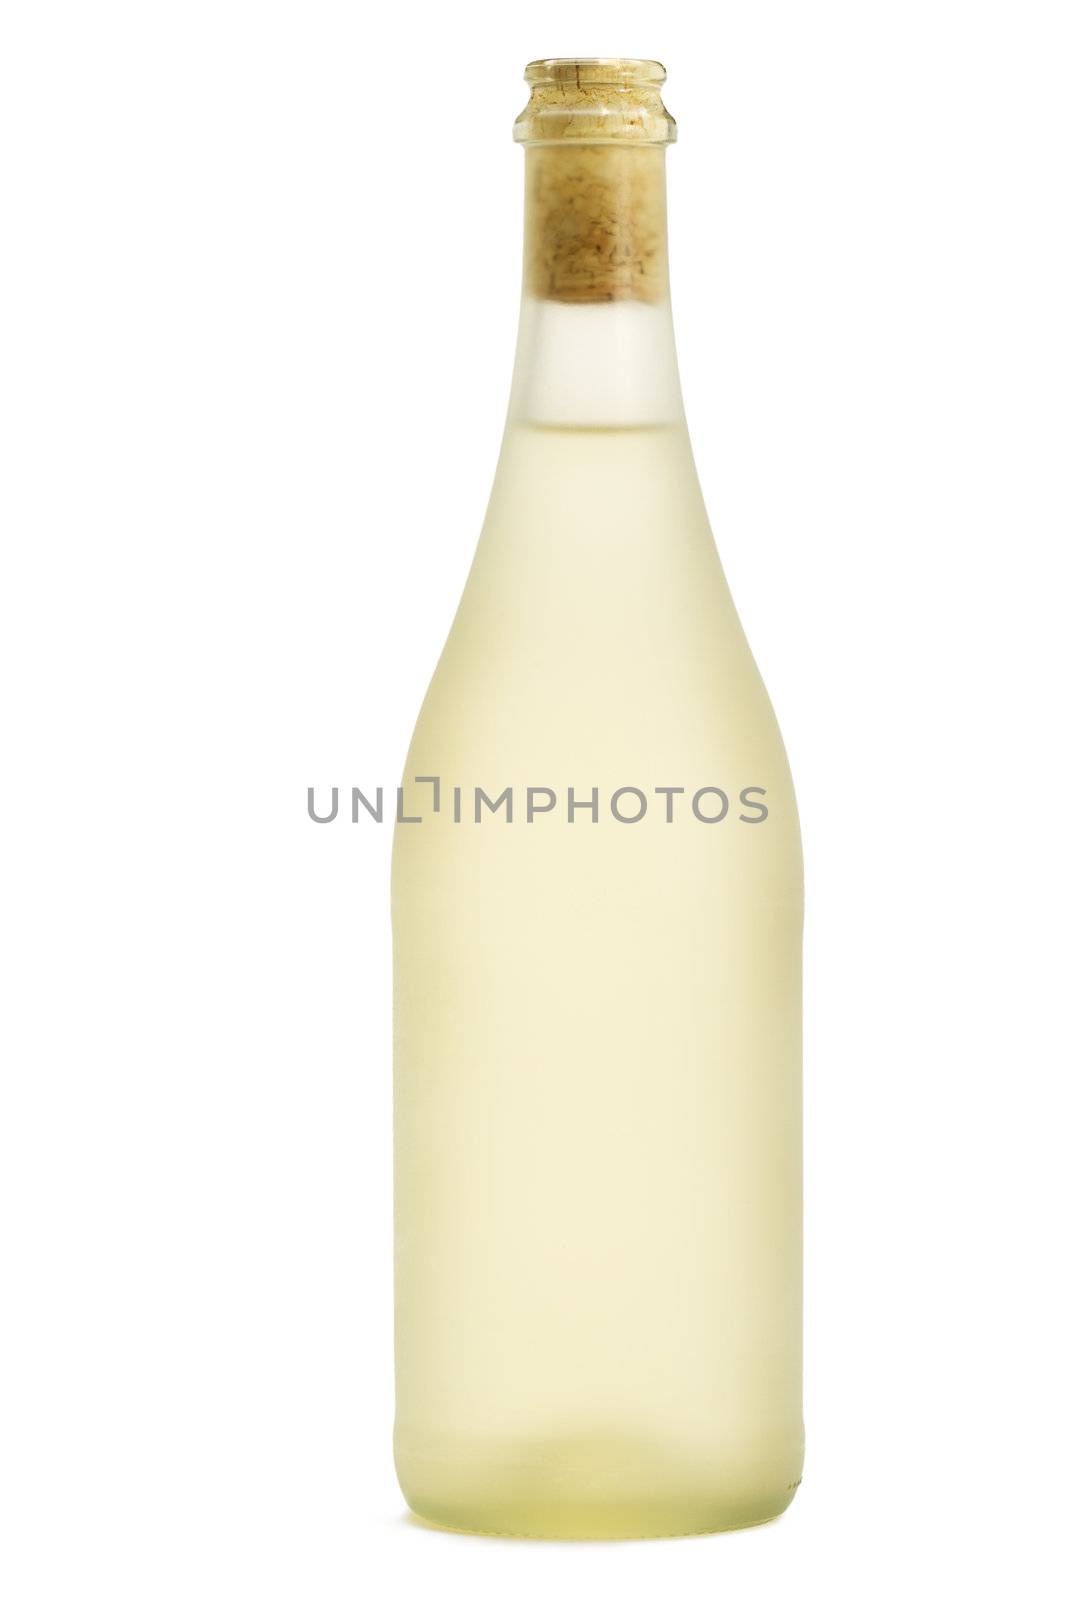 dull prosecco bottle standing on white background